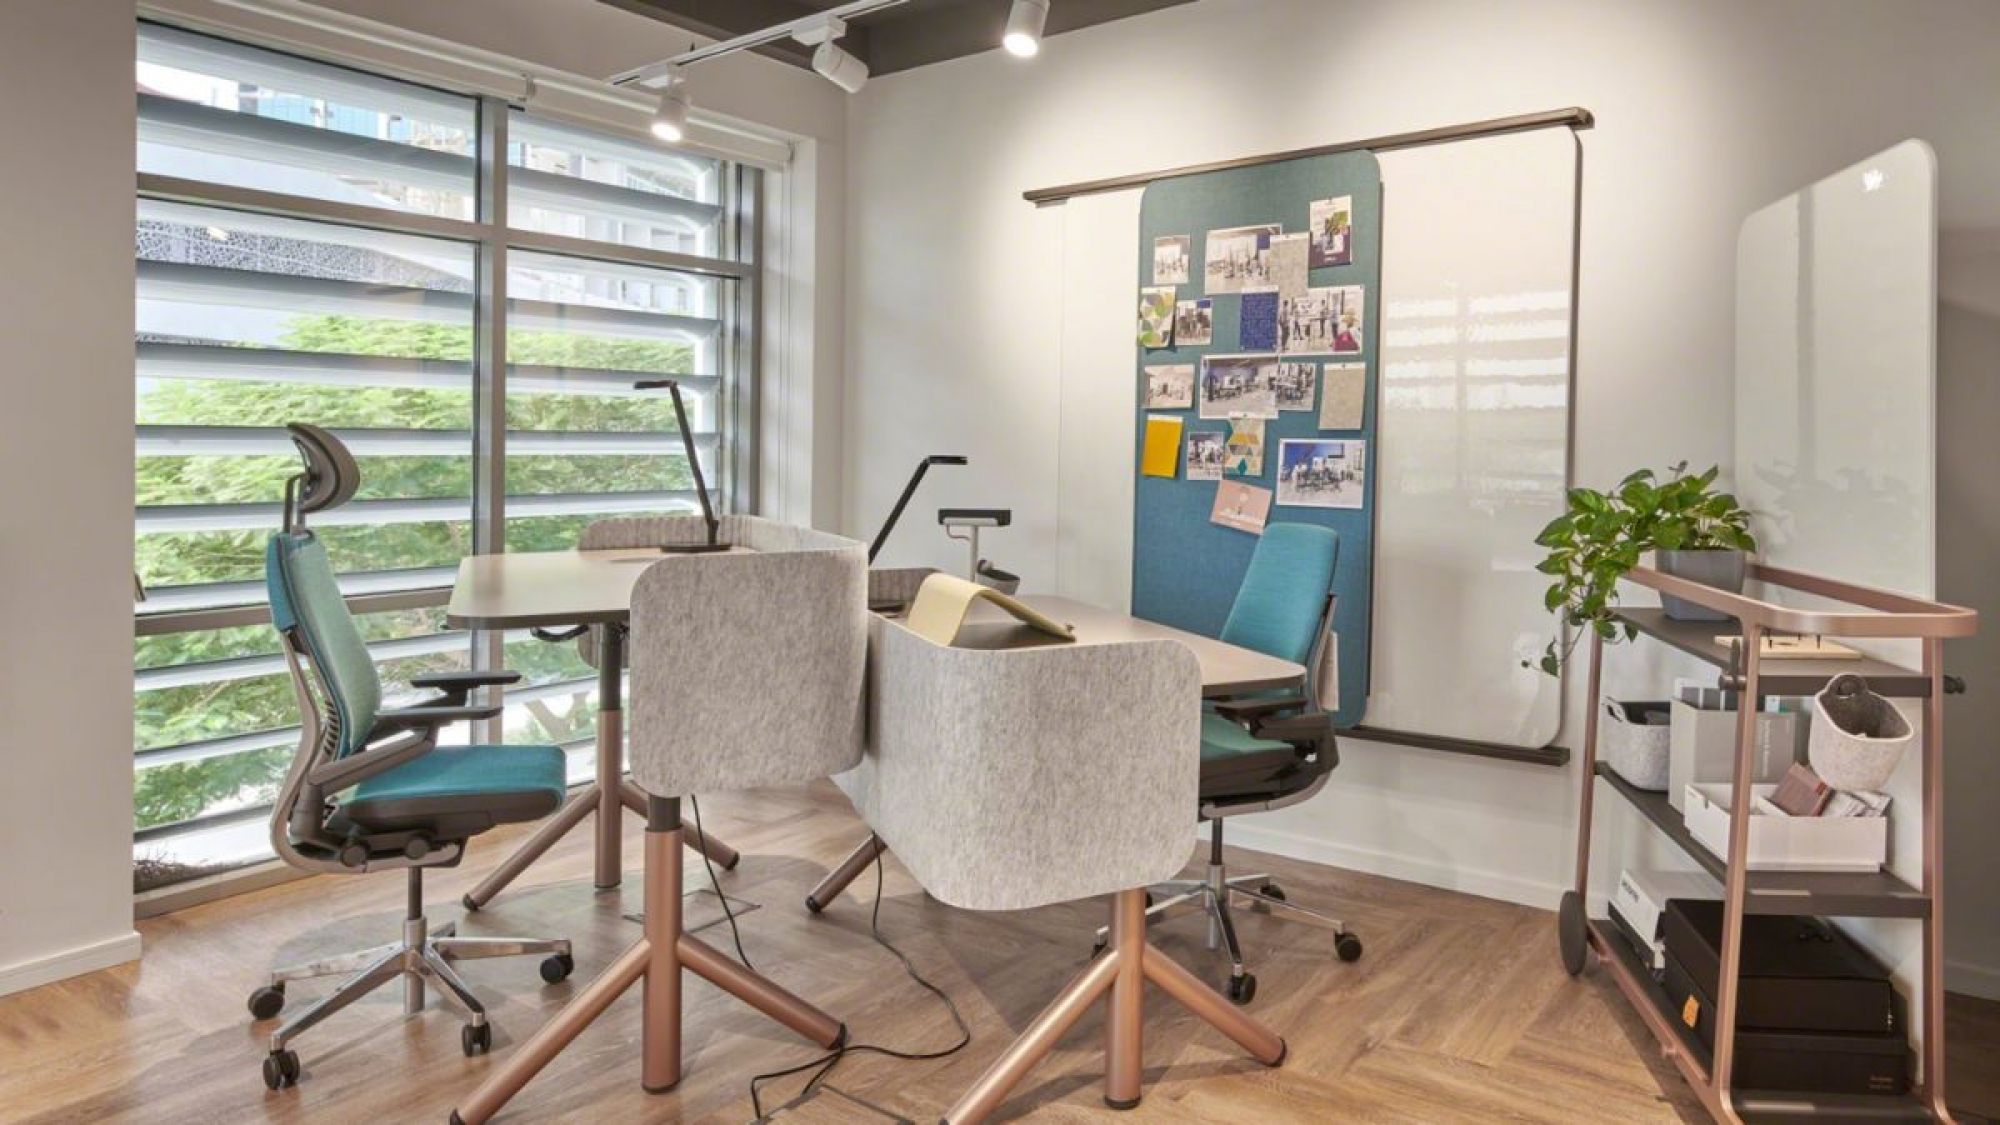 Quick Tips for Designing a Productive Office Space